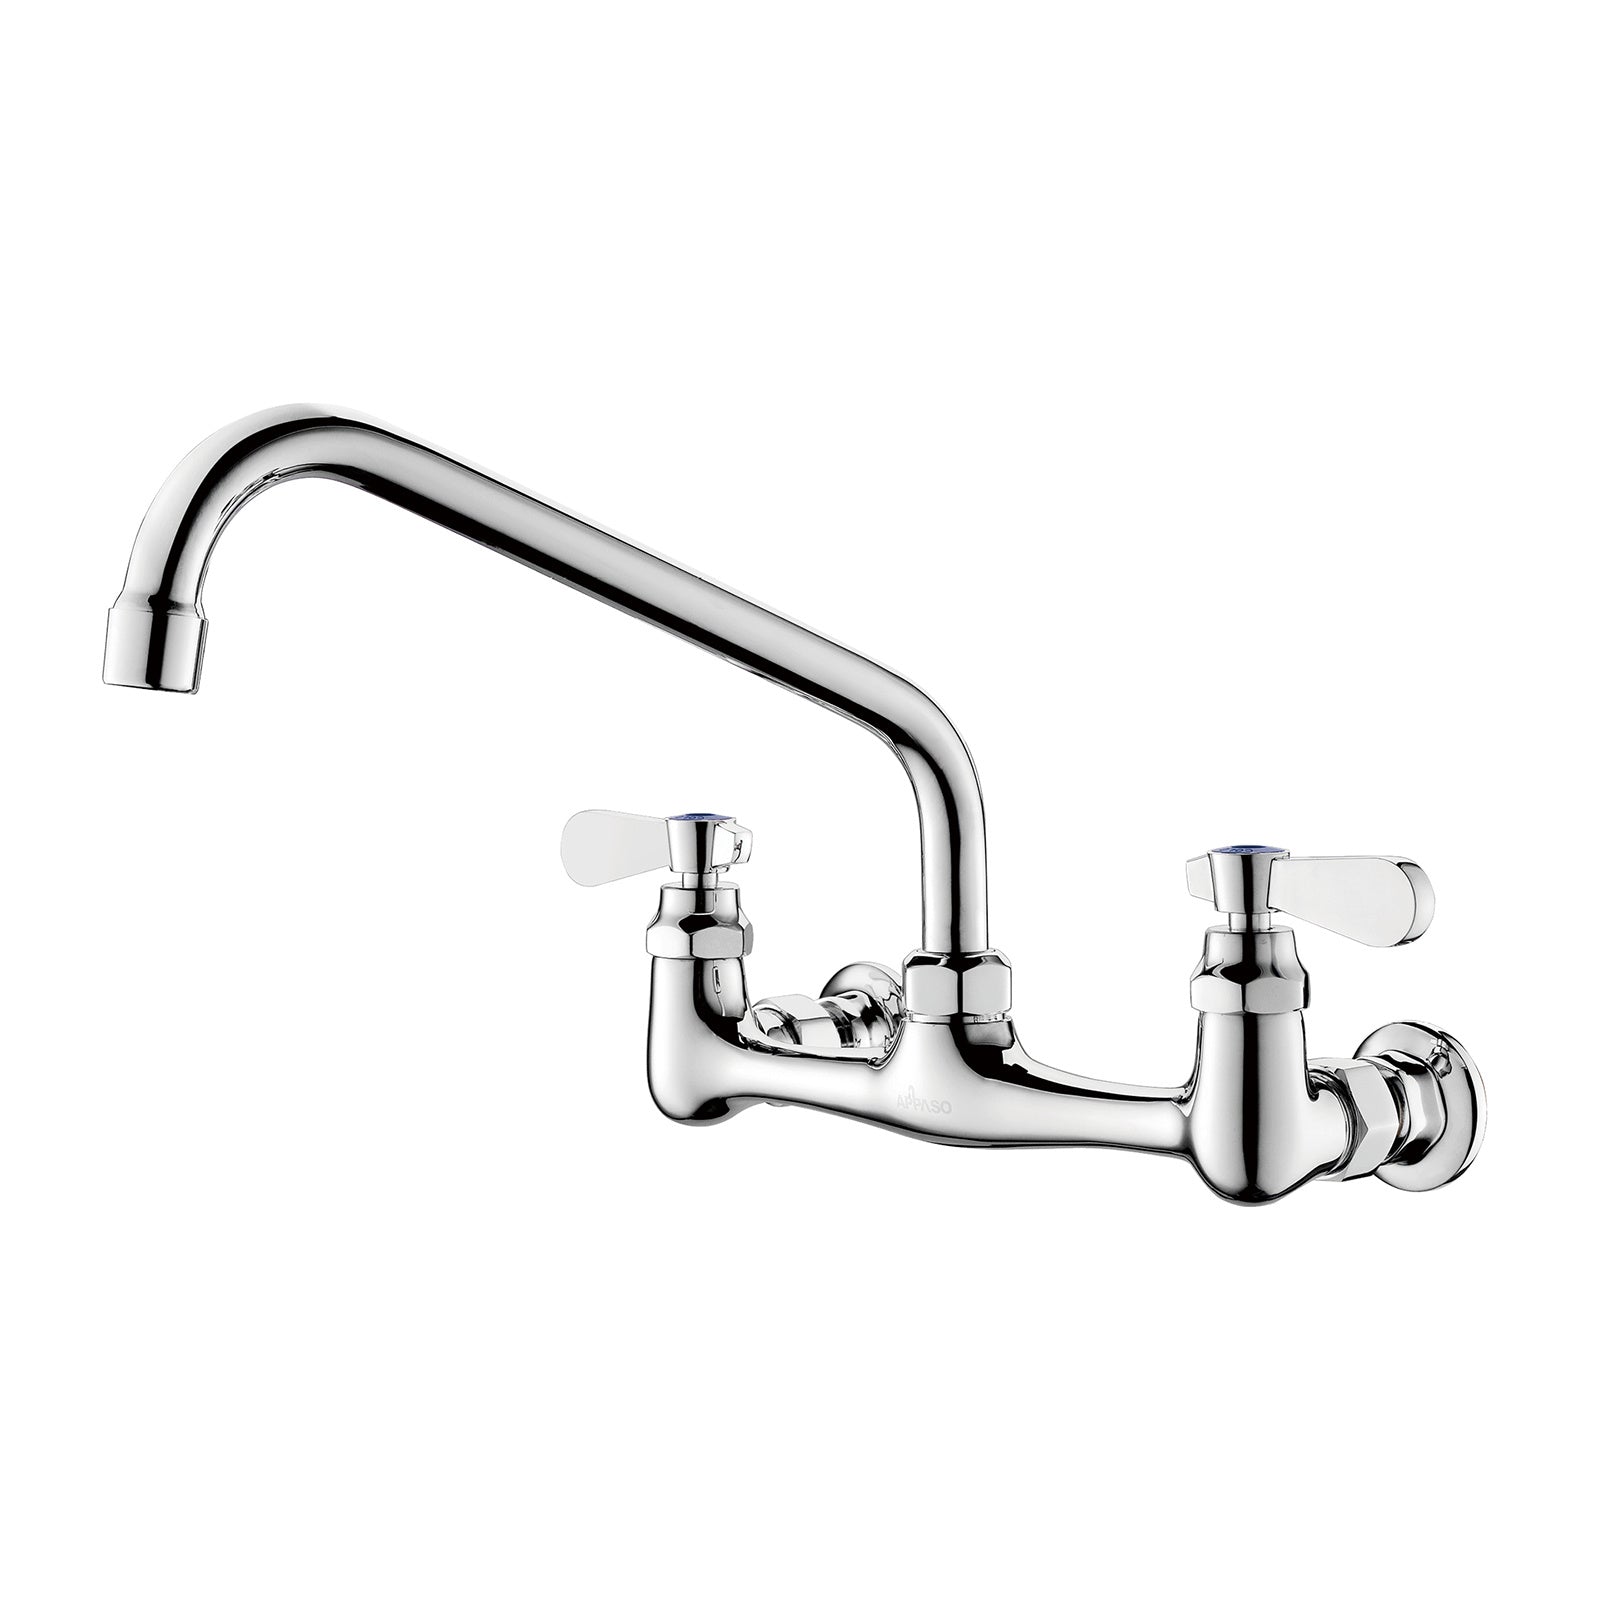 A APPASO Wall Mount Commercial Sink Faucet with 10" Swivel Spout, 8-in Center Kitchen Compartments Sink Faucet 2-Handle for Restaurant Home Backsplash Mount On 2 or 3 Bay Prep & Utility Compartment Sink with two handles on a white background.